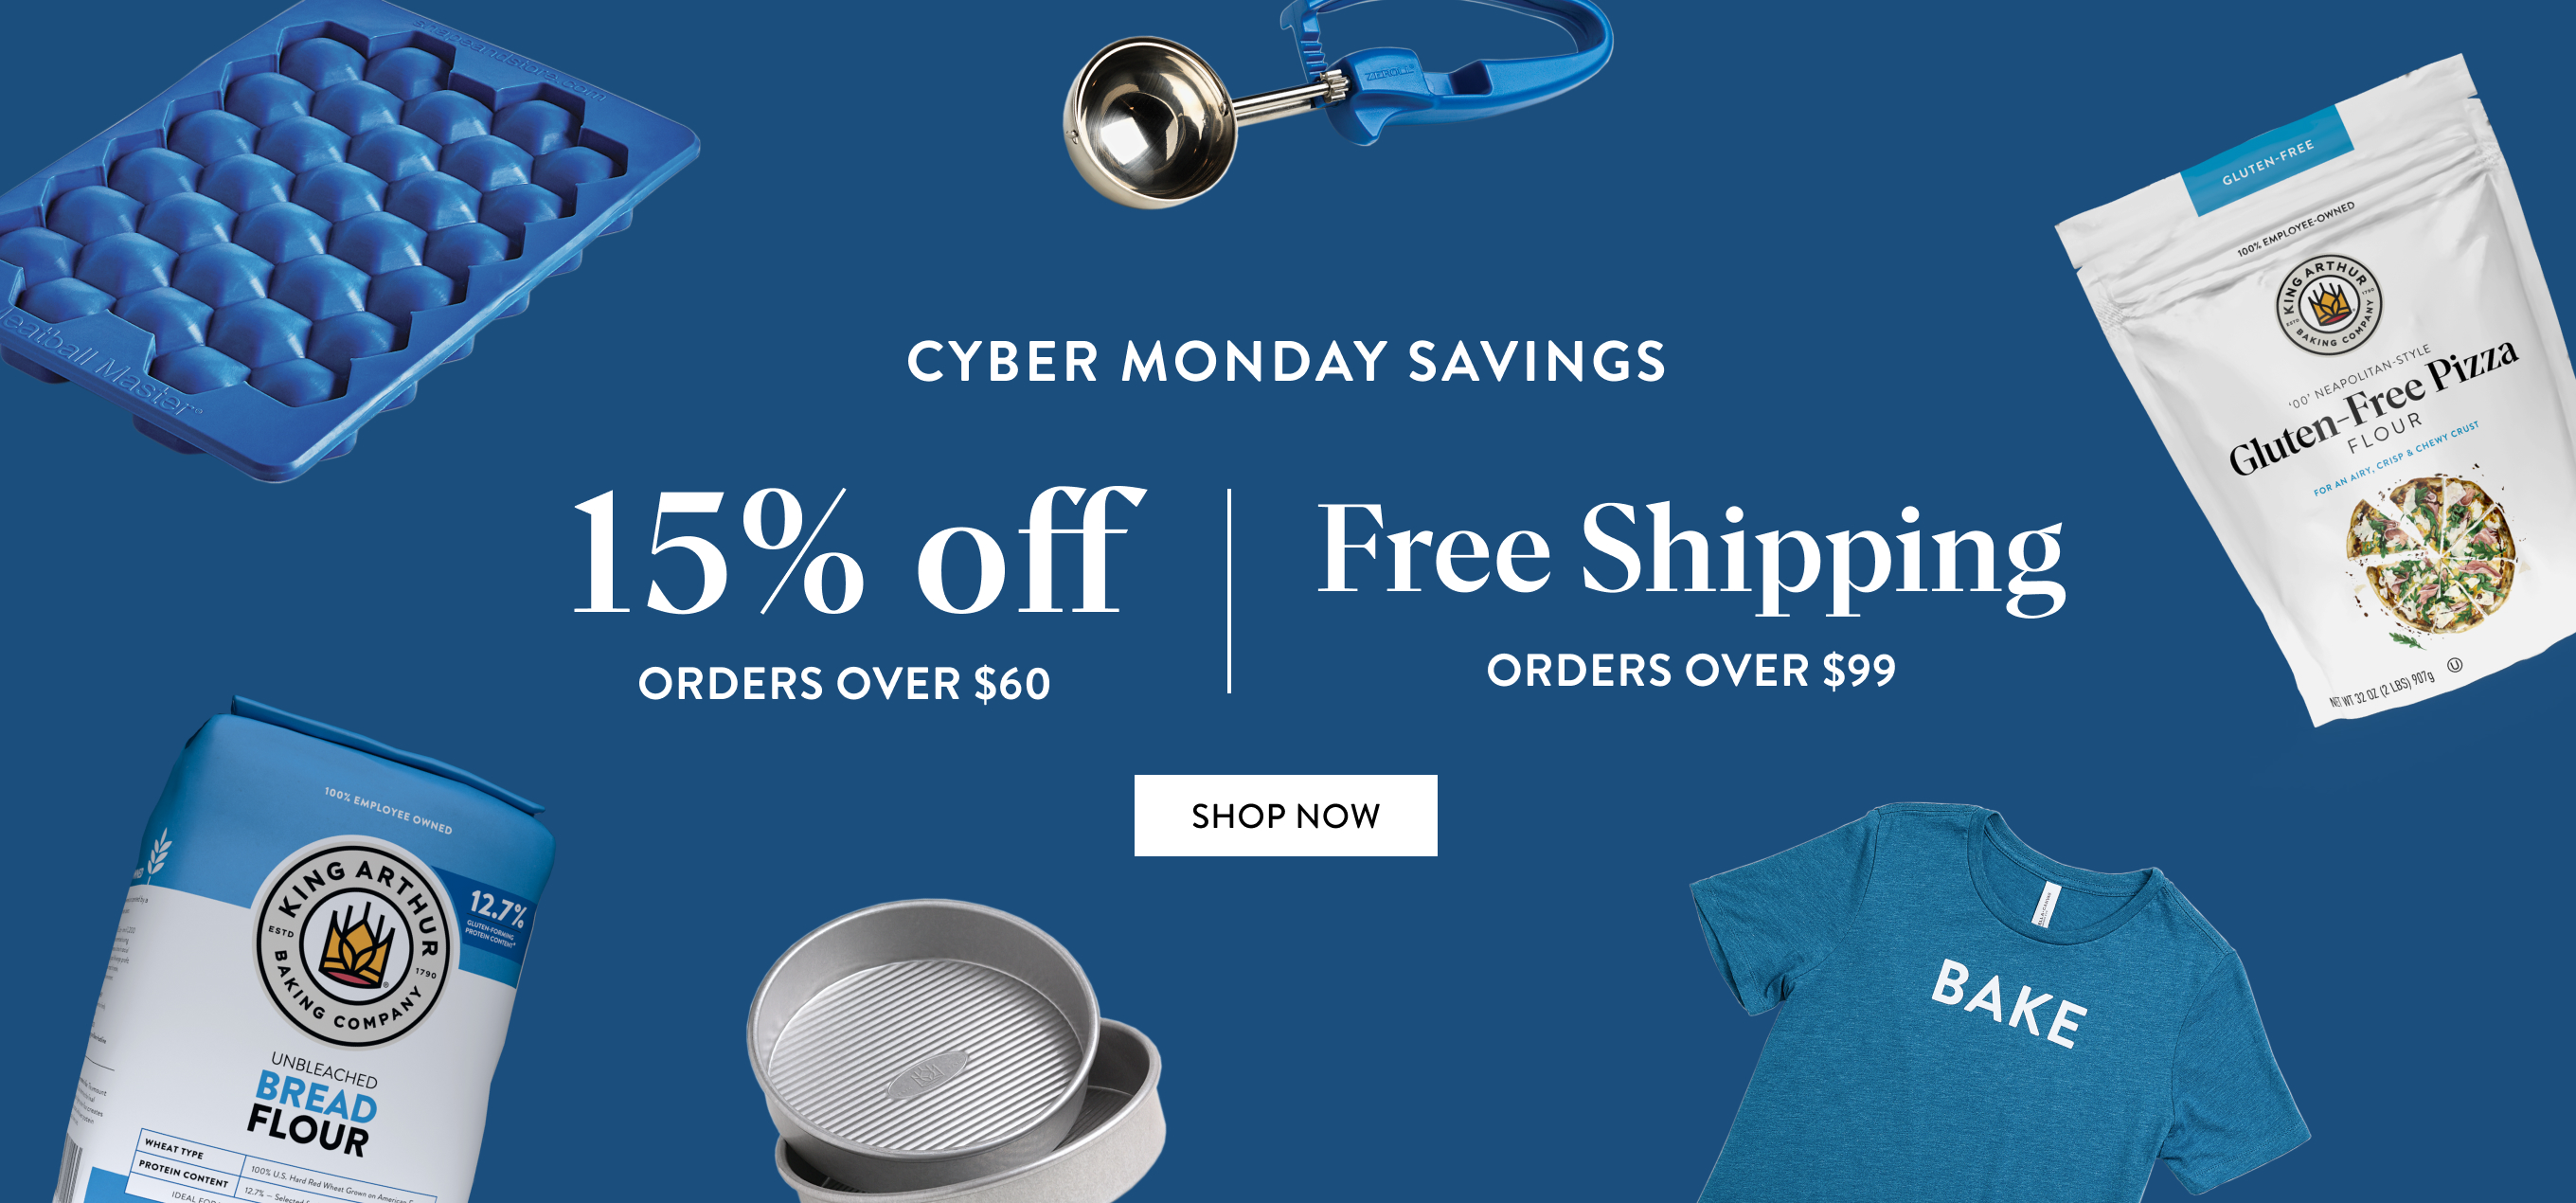 Spend $60, Save 15% - Spend $99, Free Shipping